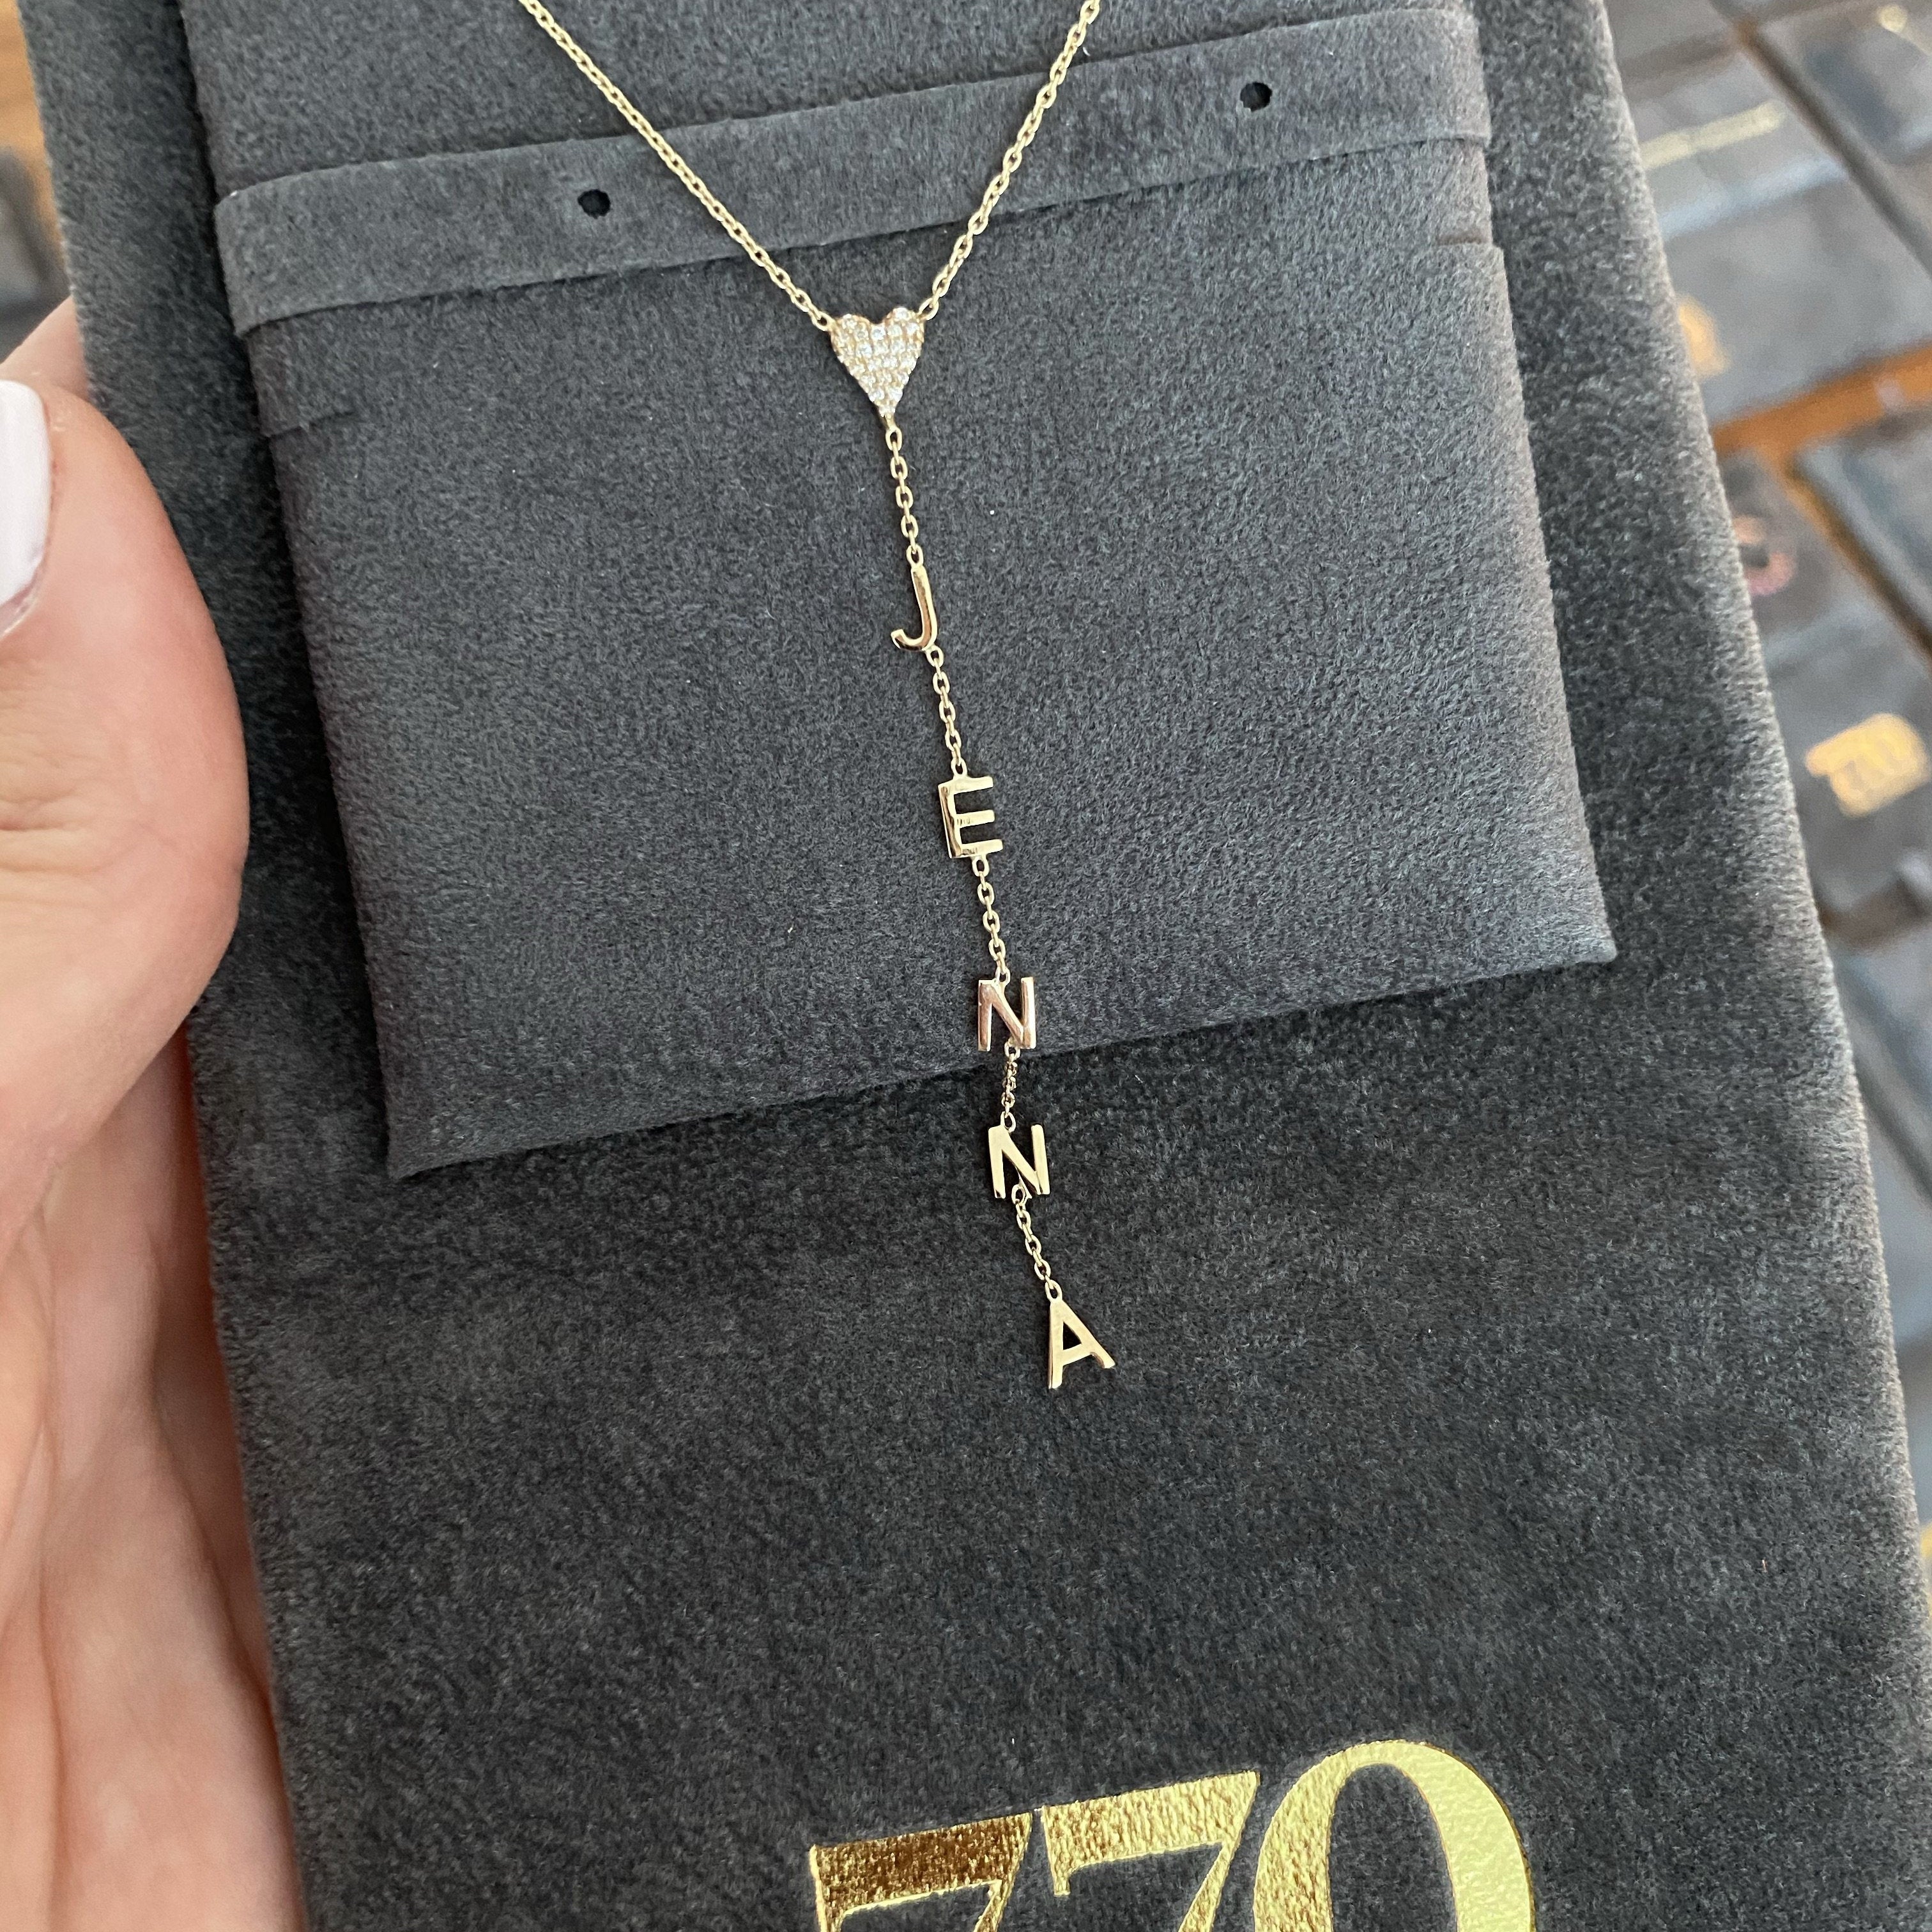 Drop Down Name Necklace (Add Diamonds/Charms)